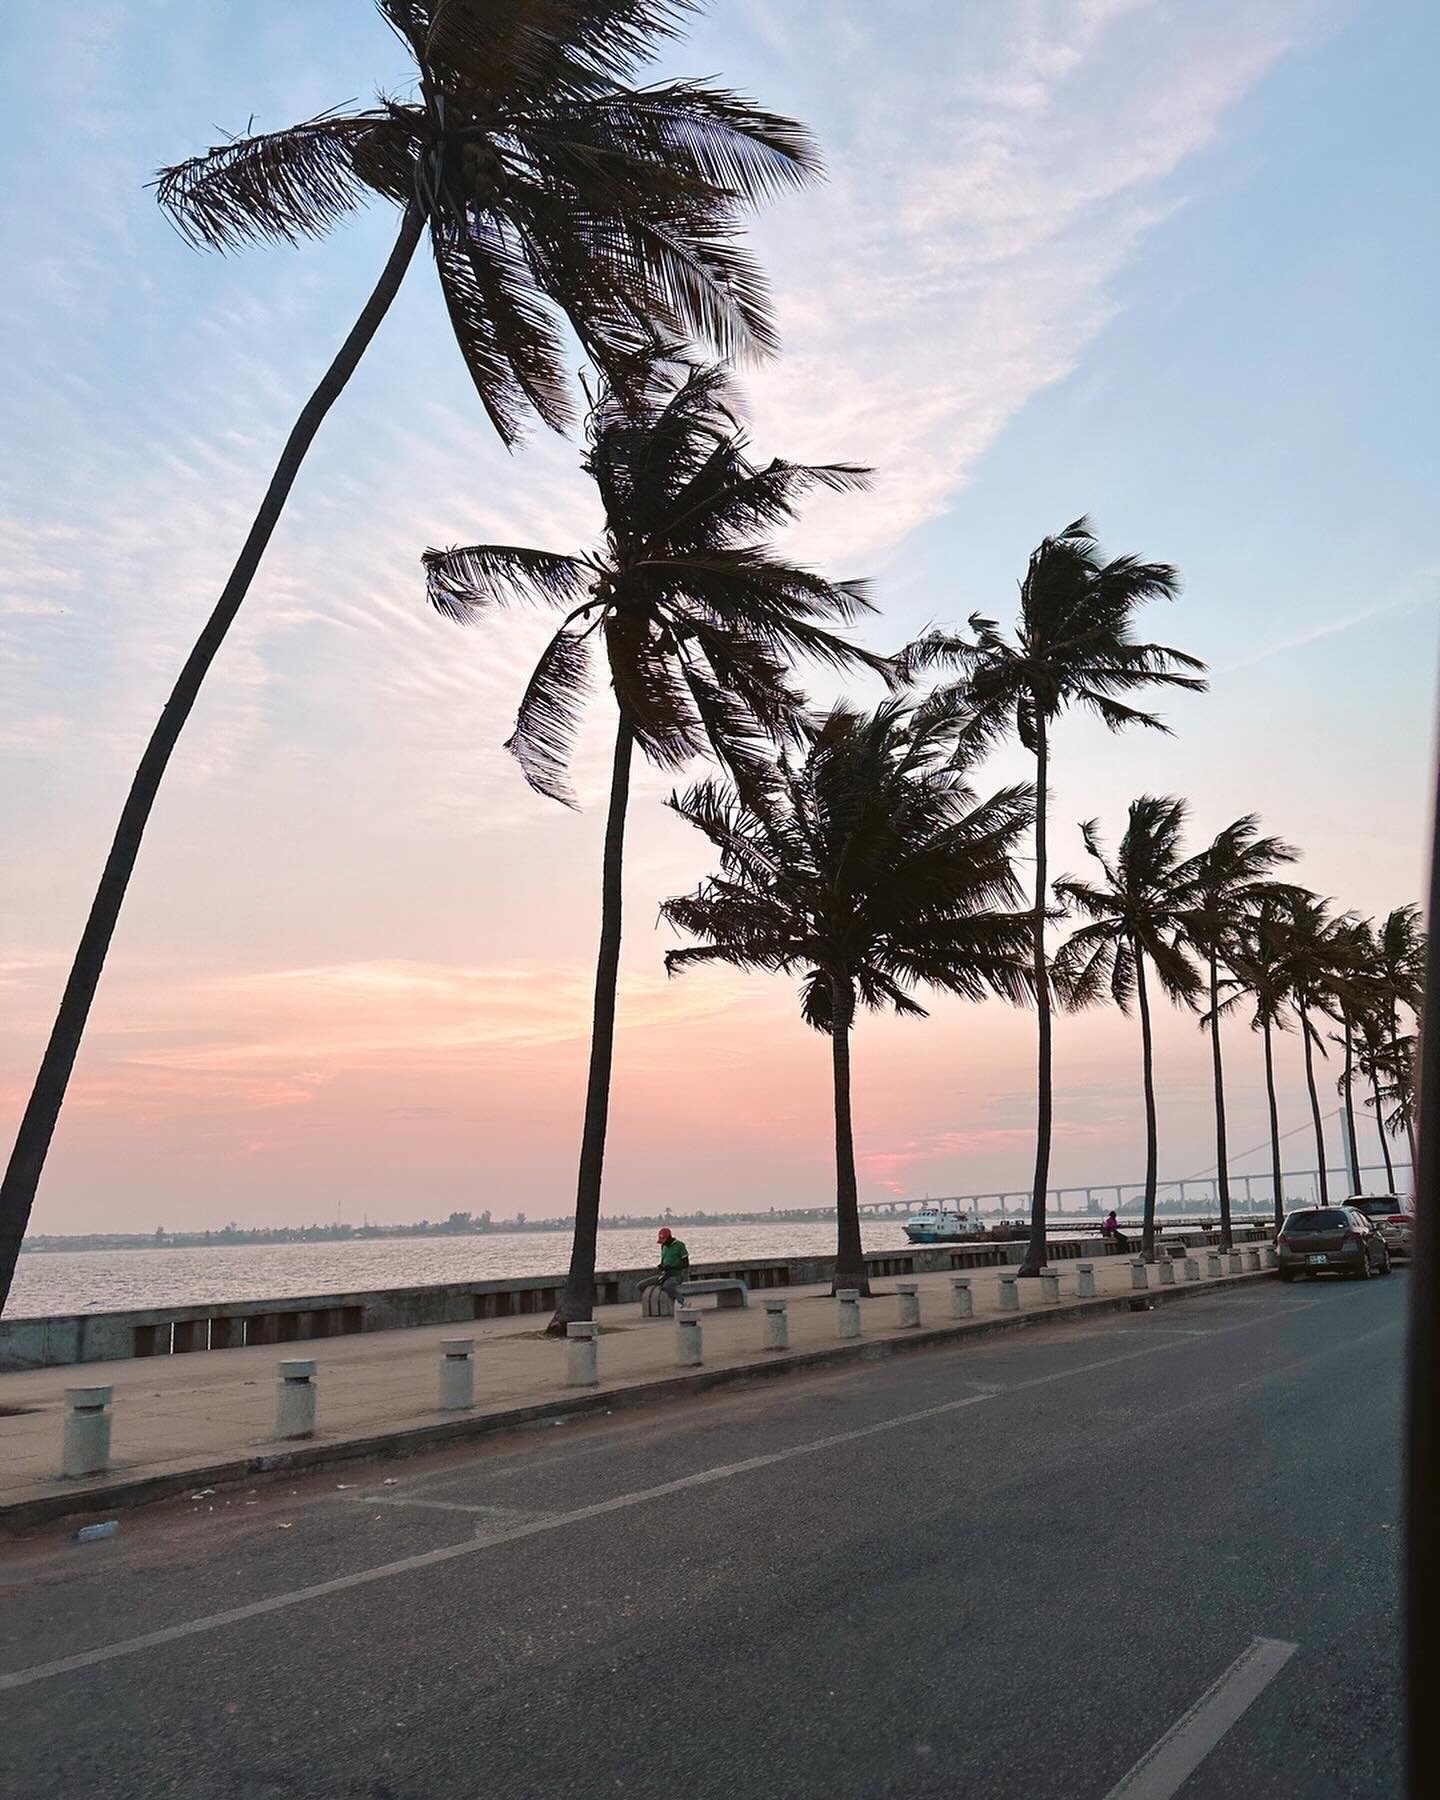 📷✨ Day 1 of our adventure trip was all about exploring Maputo, the capital city of Mozambique. Swipe to see some of the special moments so far and stay tuned to our stories for more along the way!